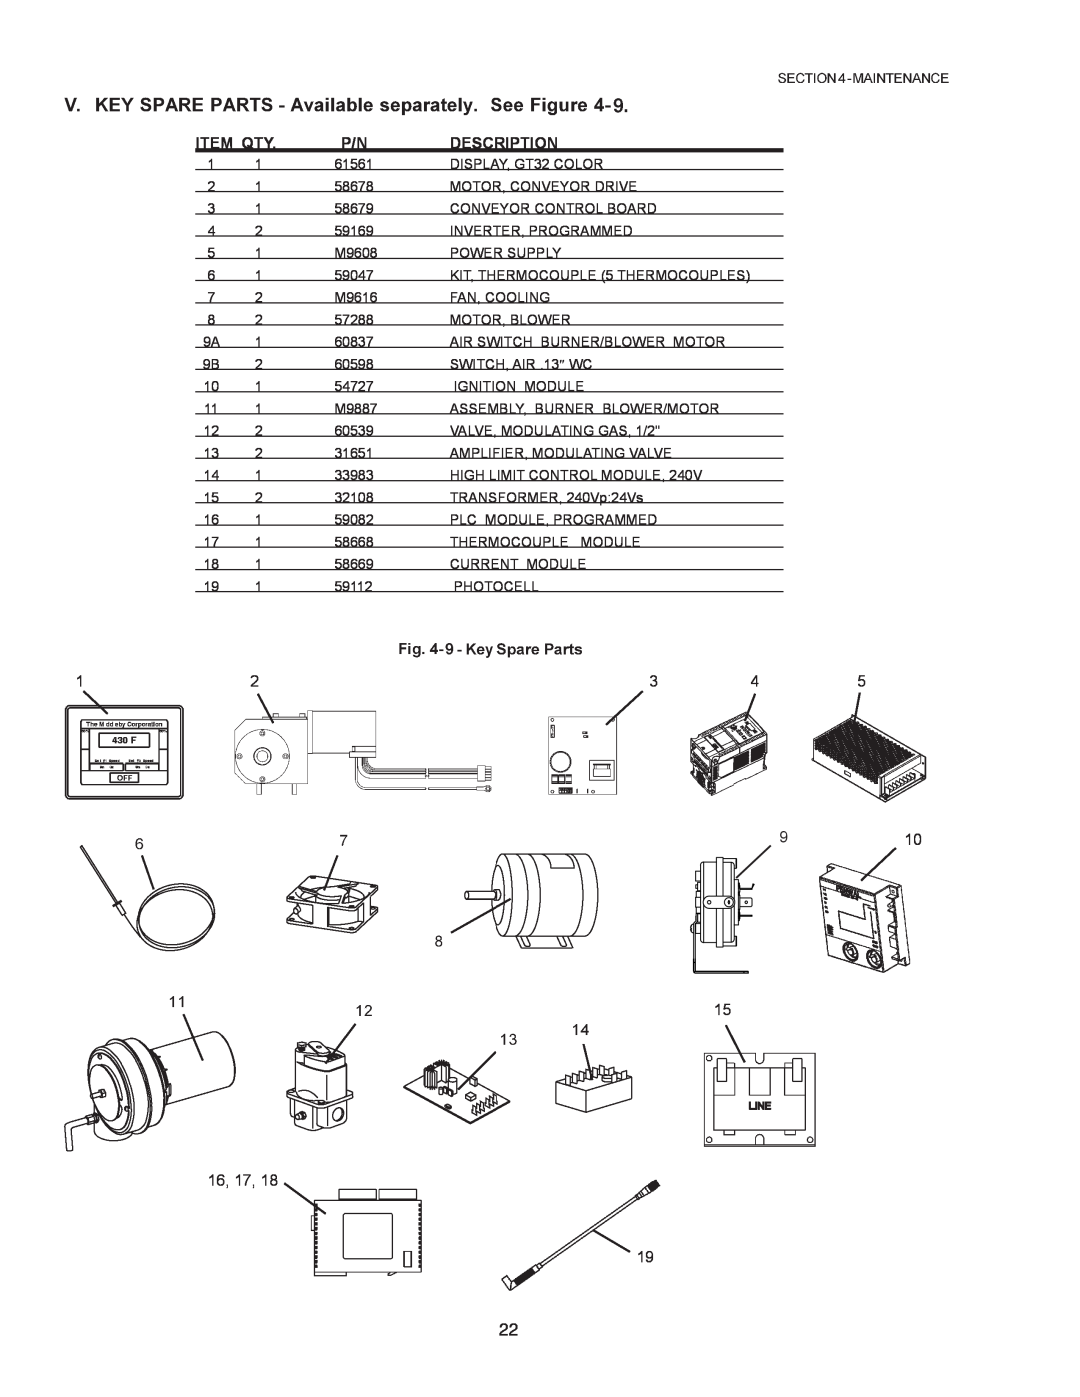 Middleby Cooking Systems Group PS770 installation manual Item Qty, Description, 910 